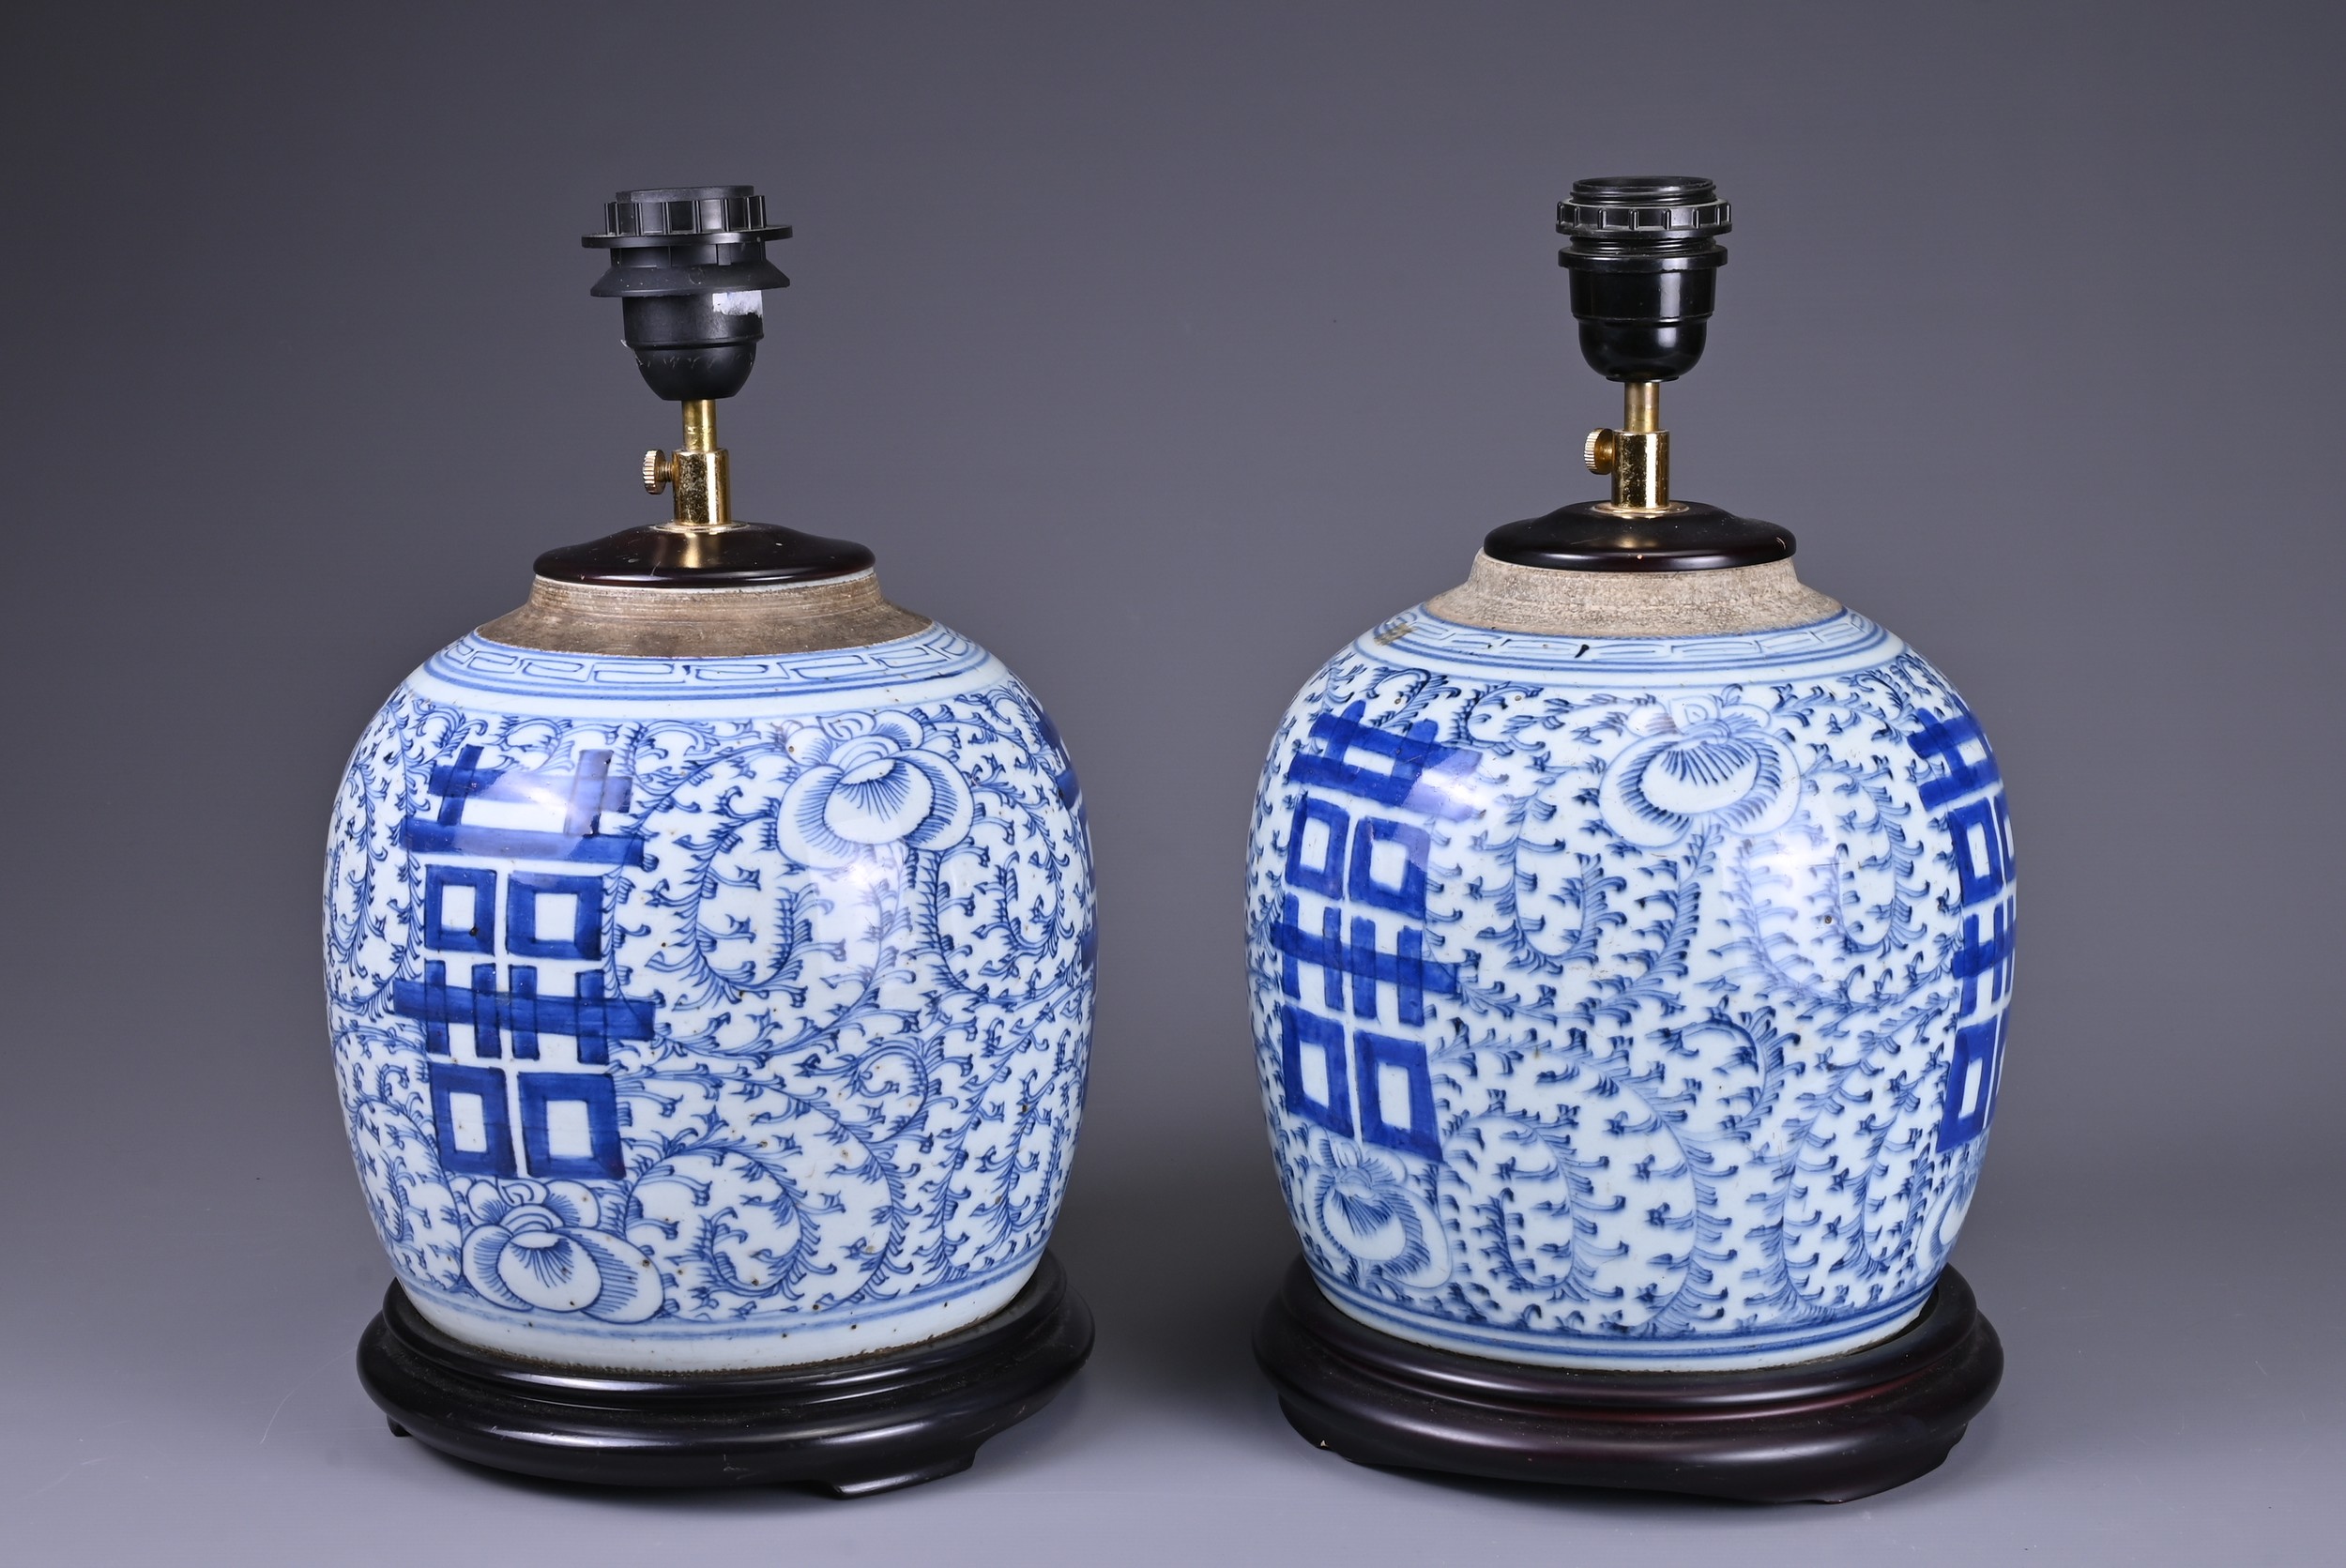 A PAIR OF 19TH CENTURY CHINESE PORCELAIN GINGER JARS MOUNTED AS LAMPS. Each decorated with scrolling - Image 3 of 5